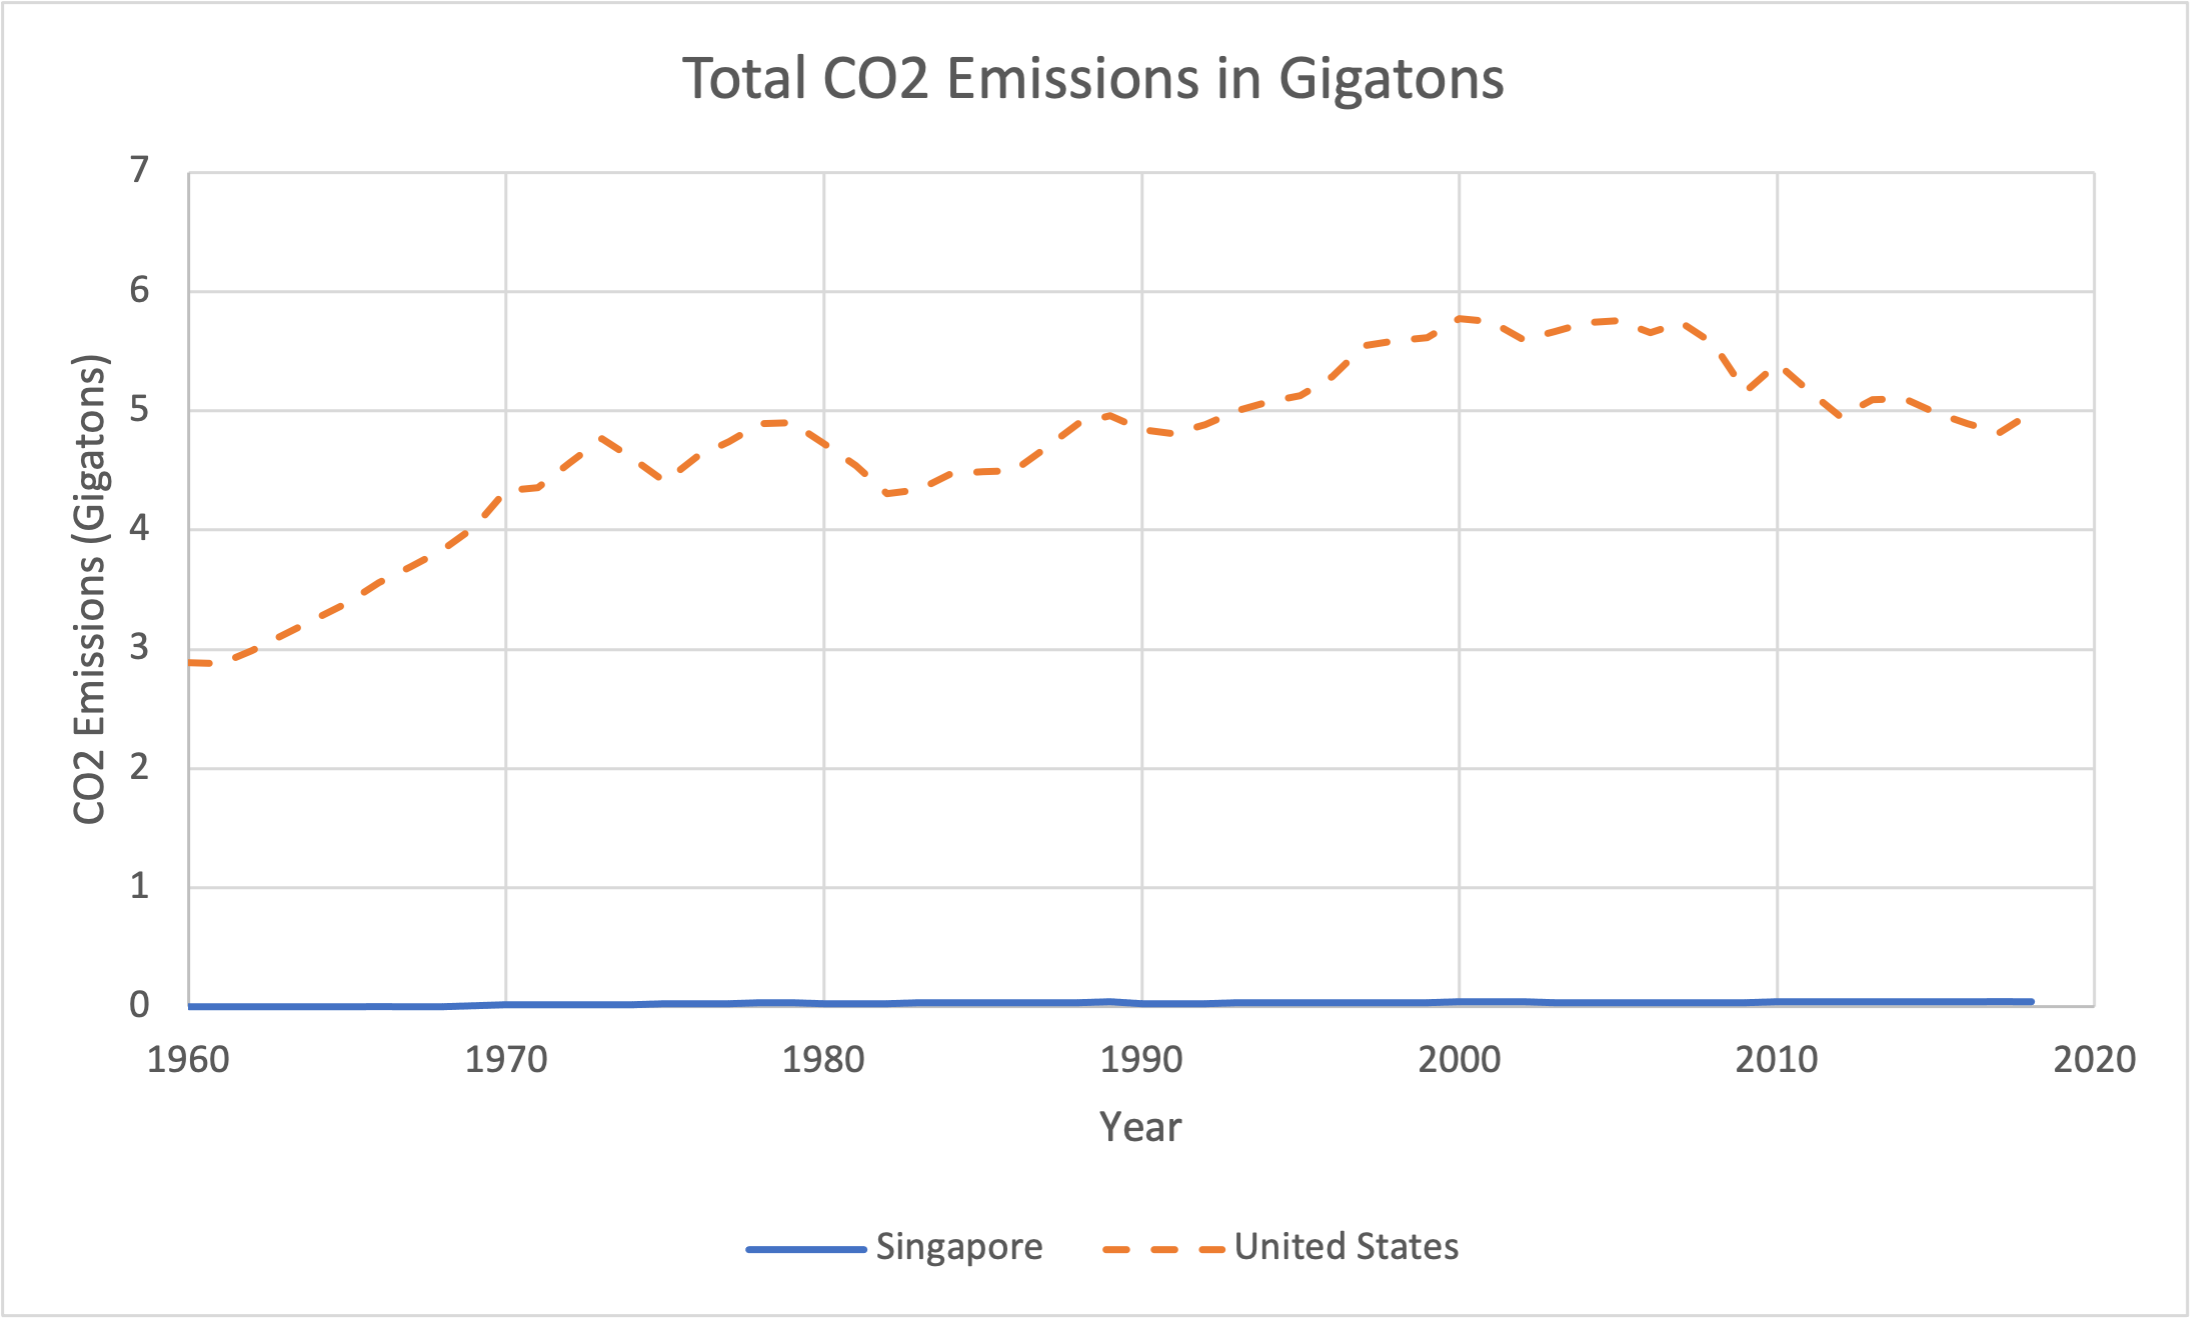 Line graphs of the total CO2 emissions of the United States and Singapore. Image description available.